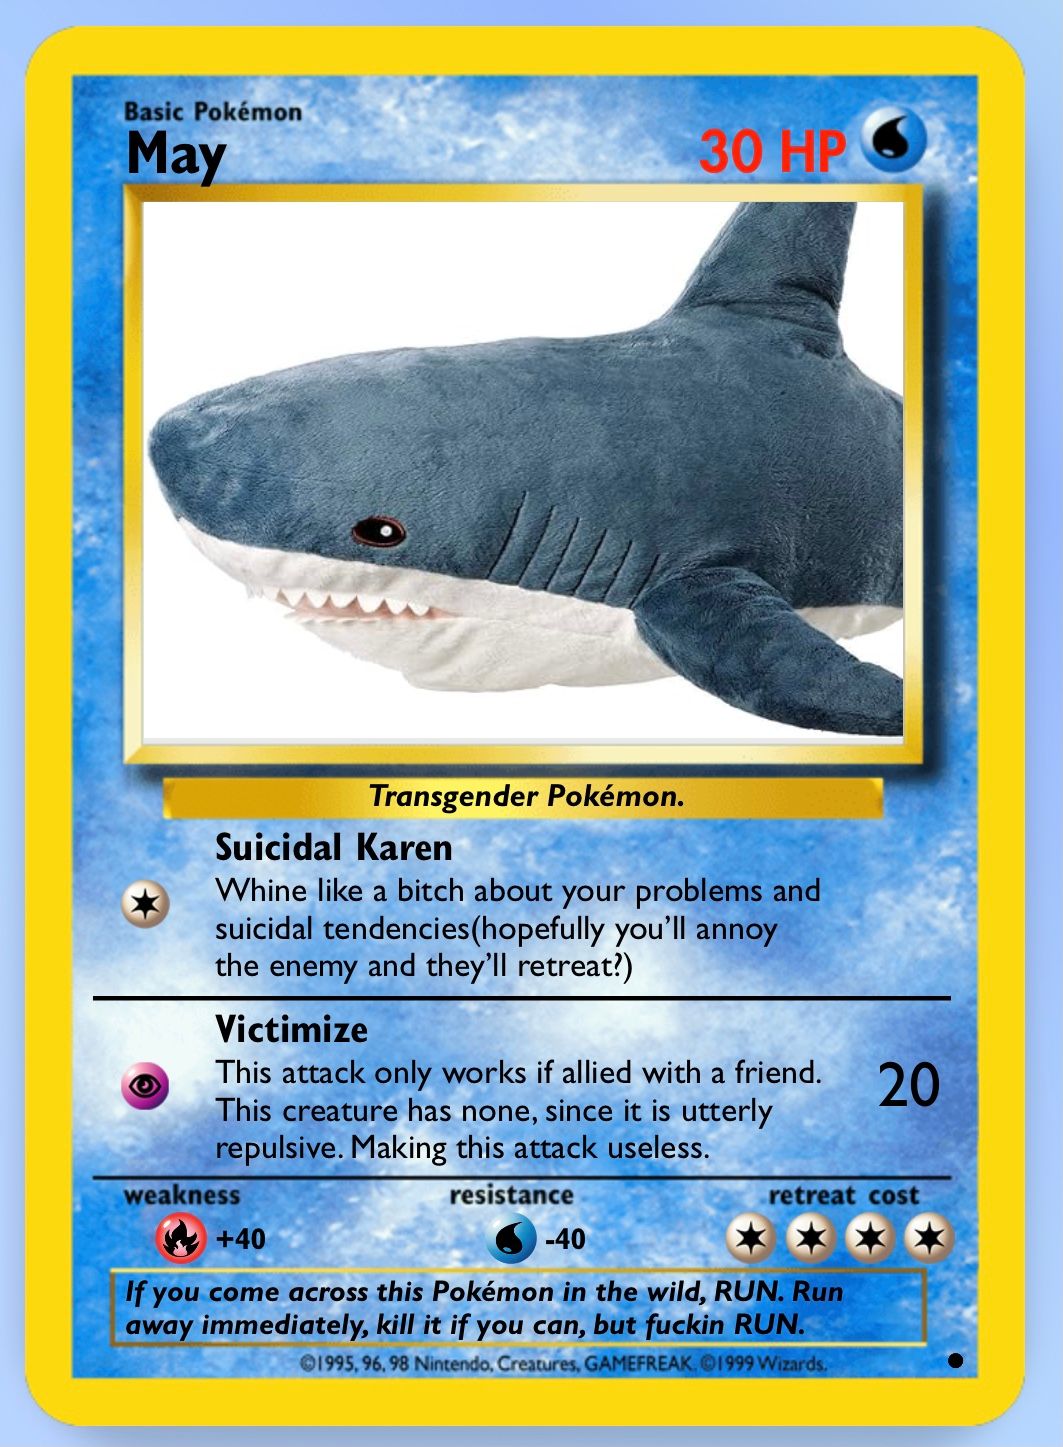 Basic Pokémon
May
Transgender Pokémon.
30 HP
Suicidal Karen
Whine like a bitch about your problems and
suicidal tendencies (hopefully you'll annoy
the enemy and they'll retreat?)
weakness
Victimize
This attack only works if allied with a friend.
This creature has none, since it is utterly
repulsive. Making this attack useless.
resistance
20
retreat cost
+40
-40
If you come across this Pokémon in the wild, RUN. Run
away immediately, kill it if you can, but fuckin RUN.
1995, 96, 98 Nintendo, Creatures, GAMEFREAK. 1999 Wizards.
***